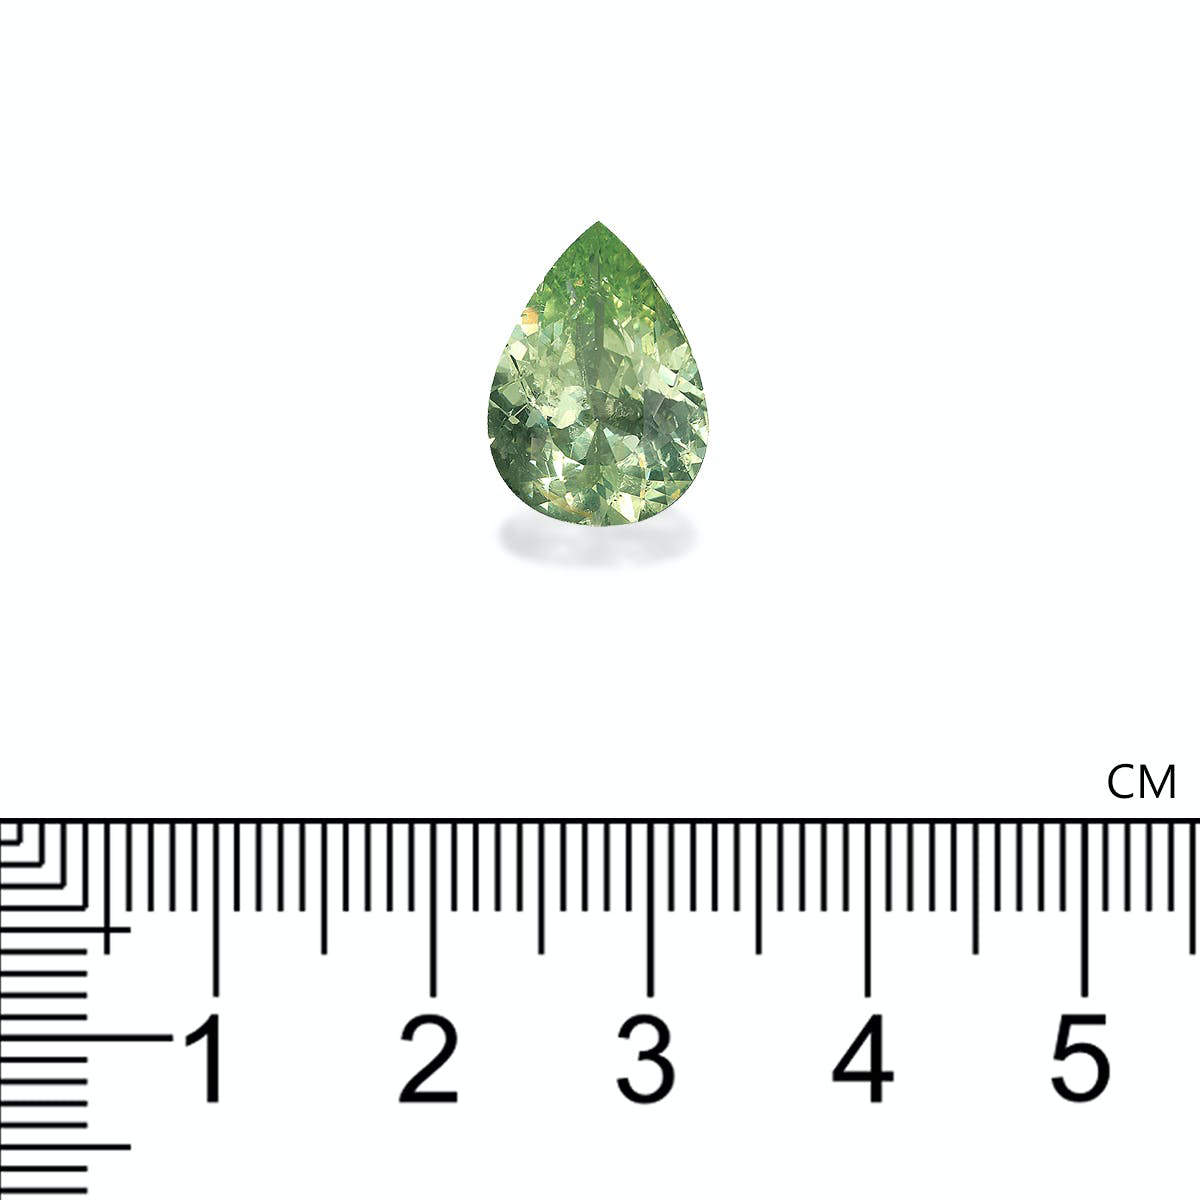 Picture of Pale Green Chrysoberyl 5.35ct (CB0015)